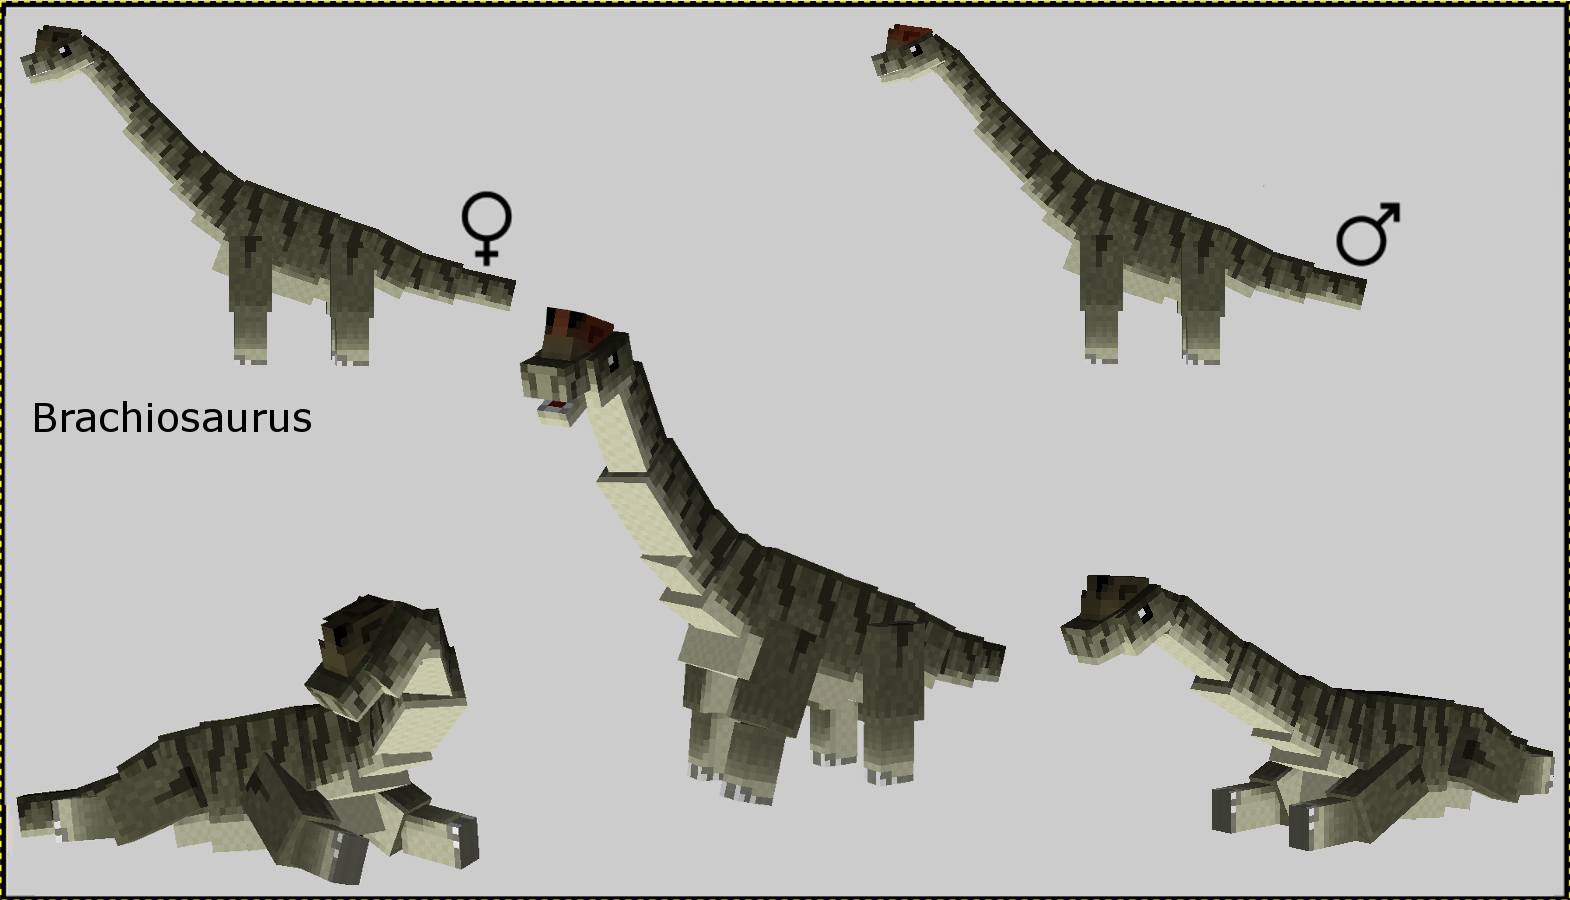 Fossils And Archeology Revival Build 732 The Dinosaur Renaissance Update Dinosaurs In 